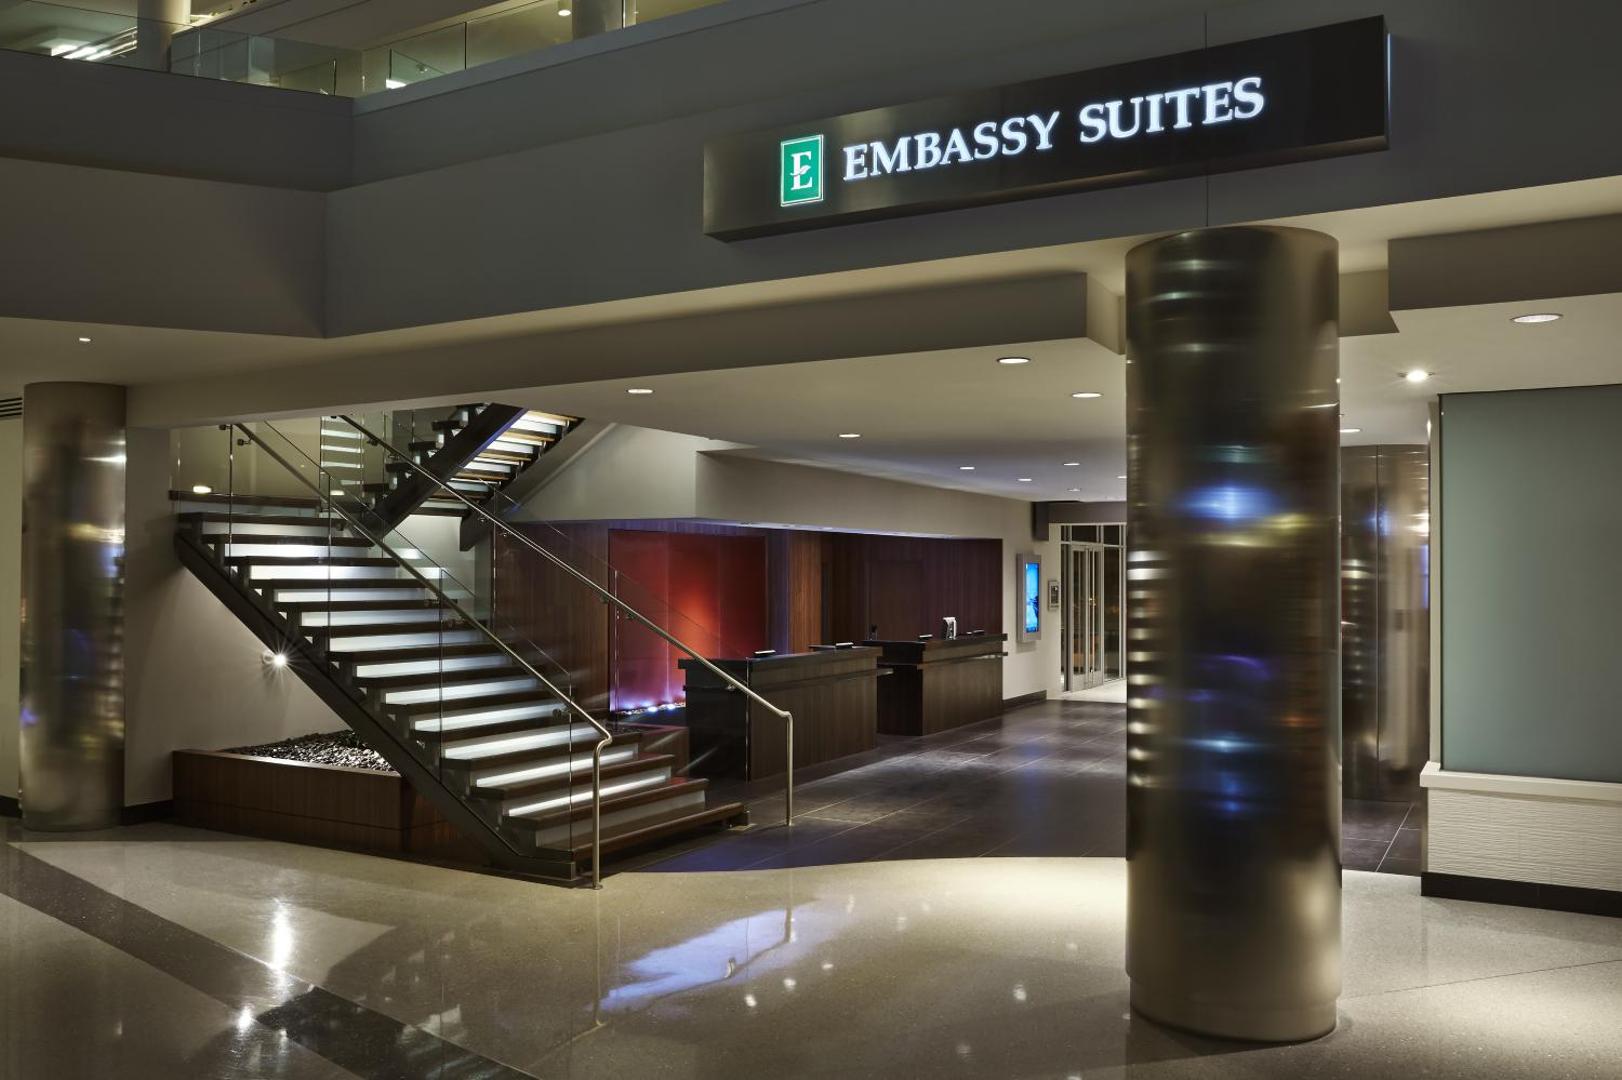 Embassy Suites at the Chevy Chase Pavilion